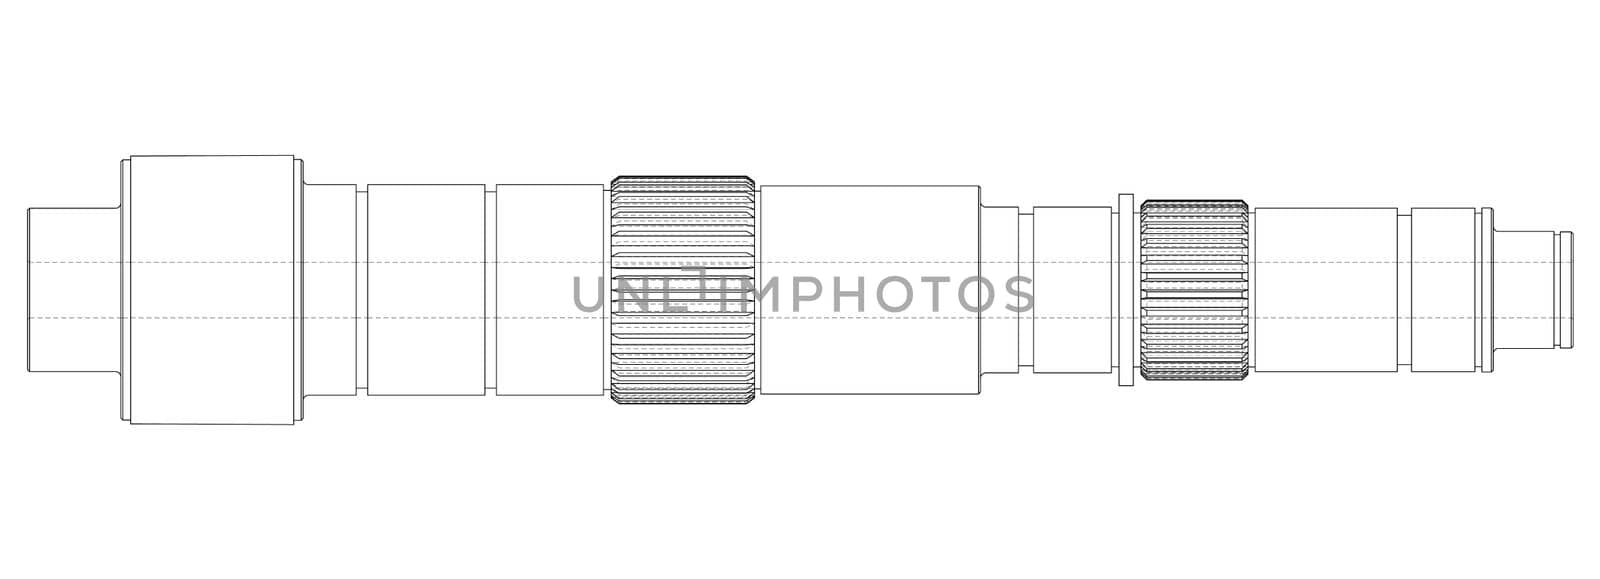 Shaft with gear wheel. 3d illustration. Wire-frame style